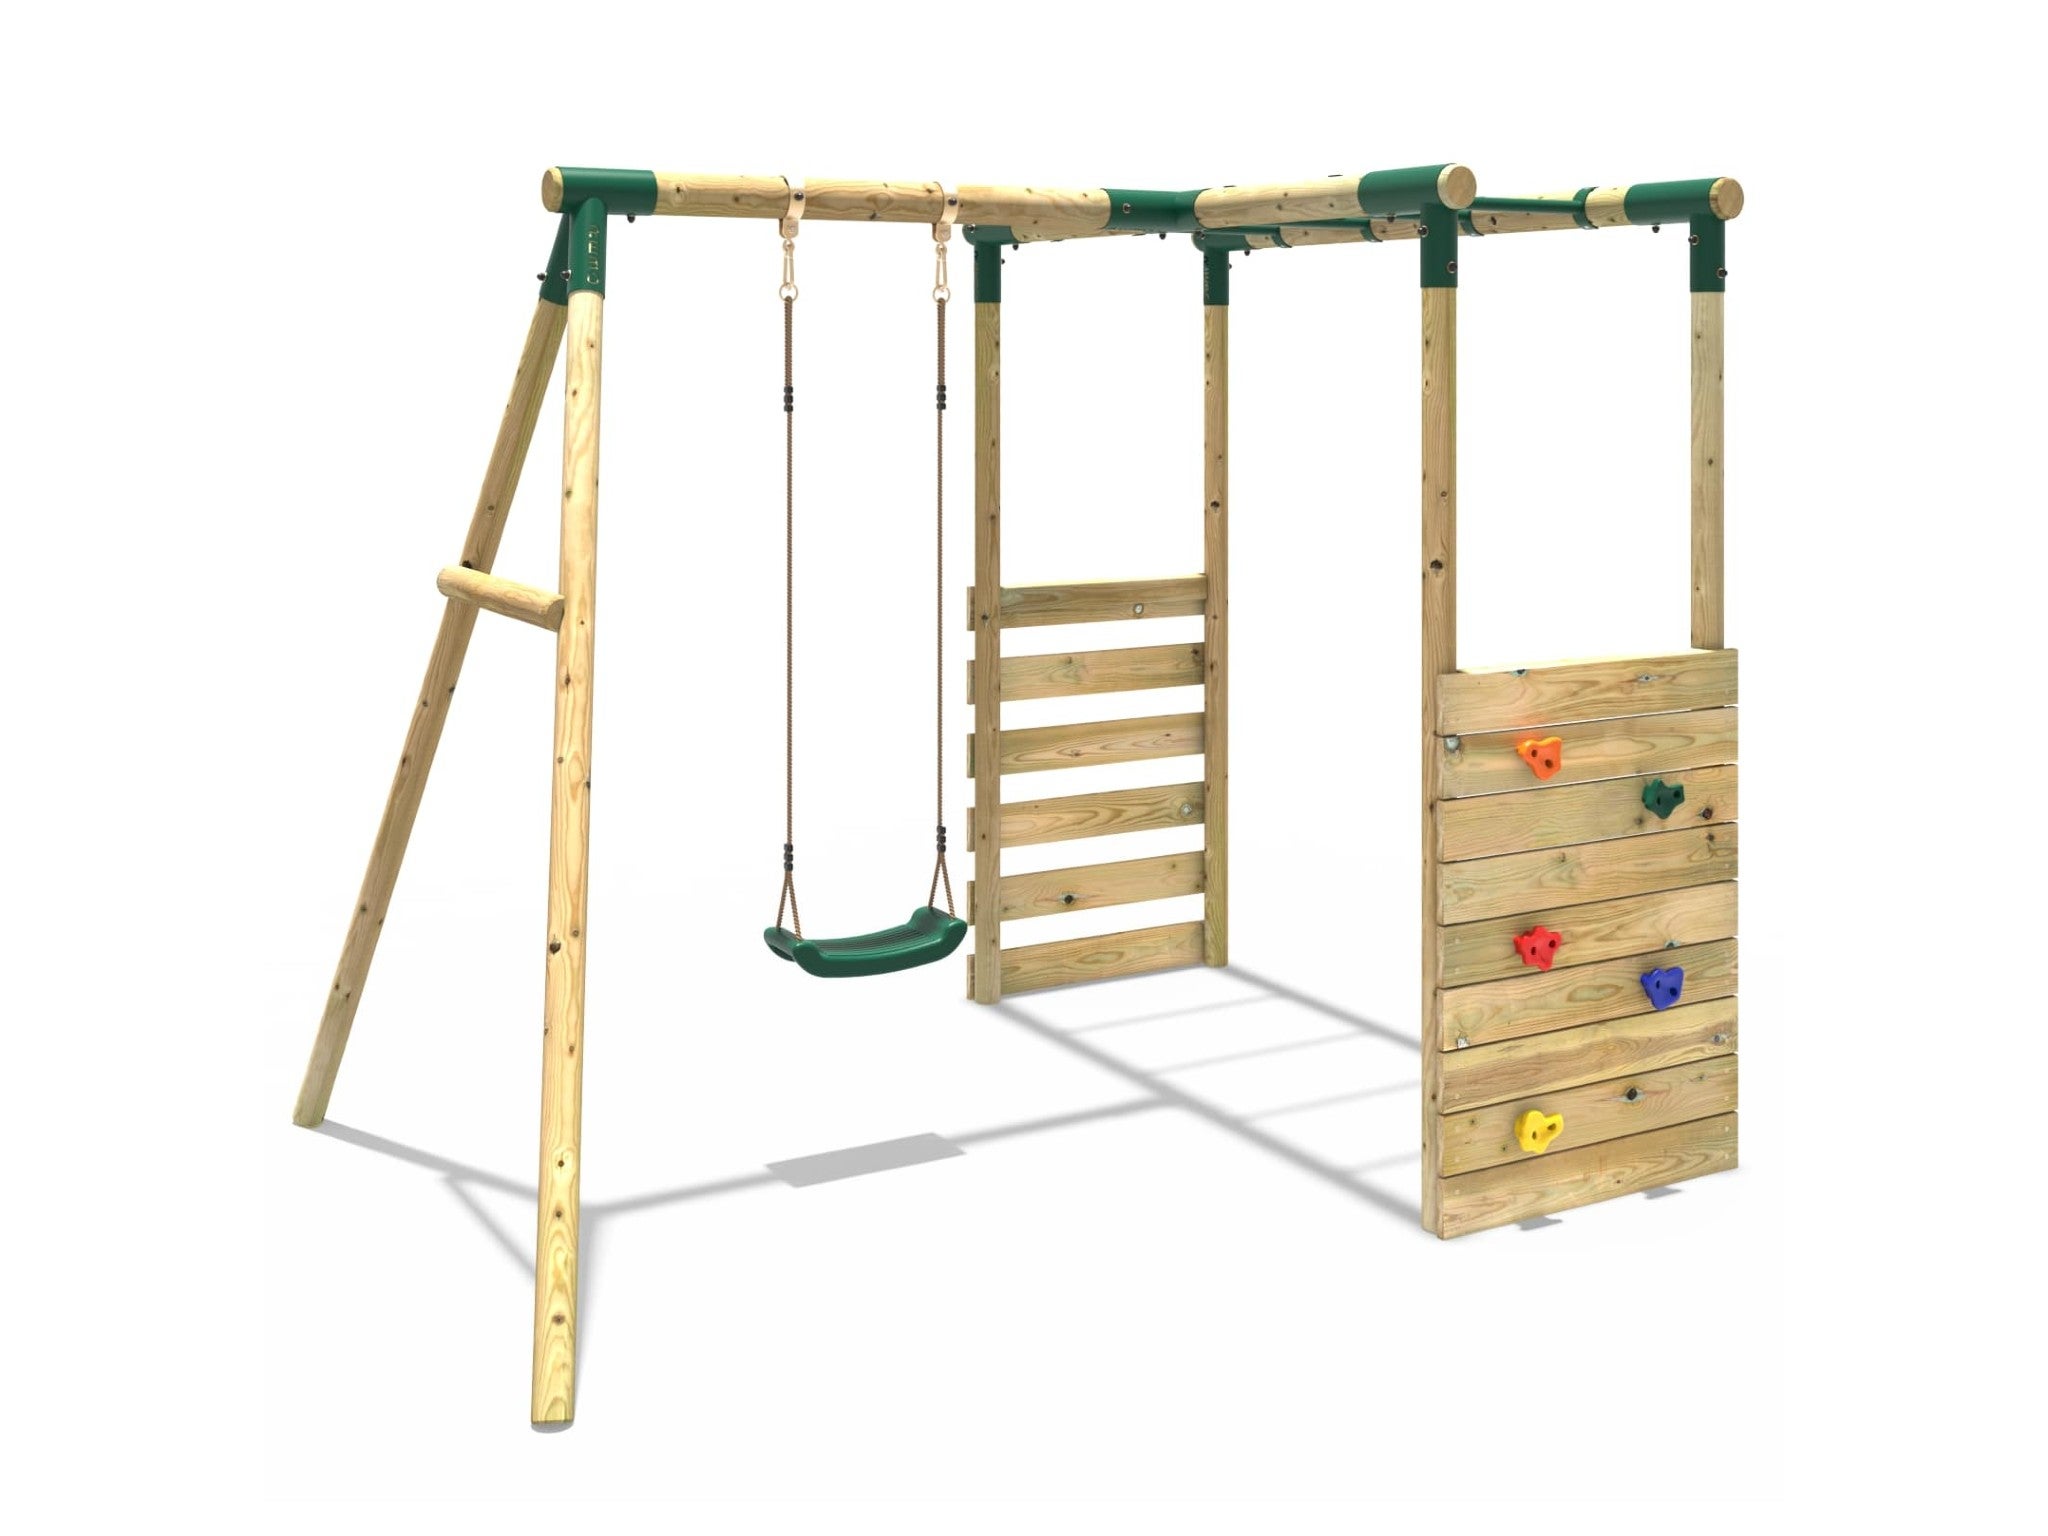 Rebo wooden garden swing set with monkey bars indybest